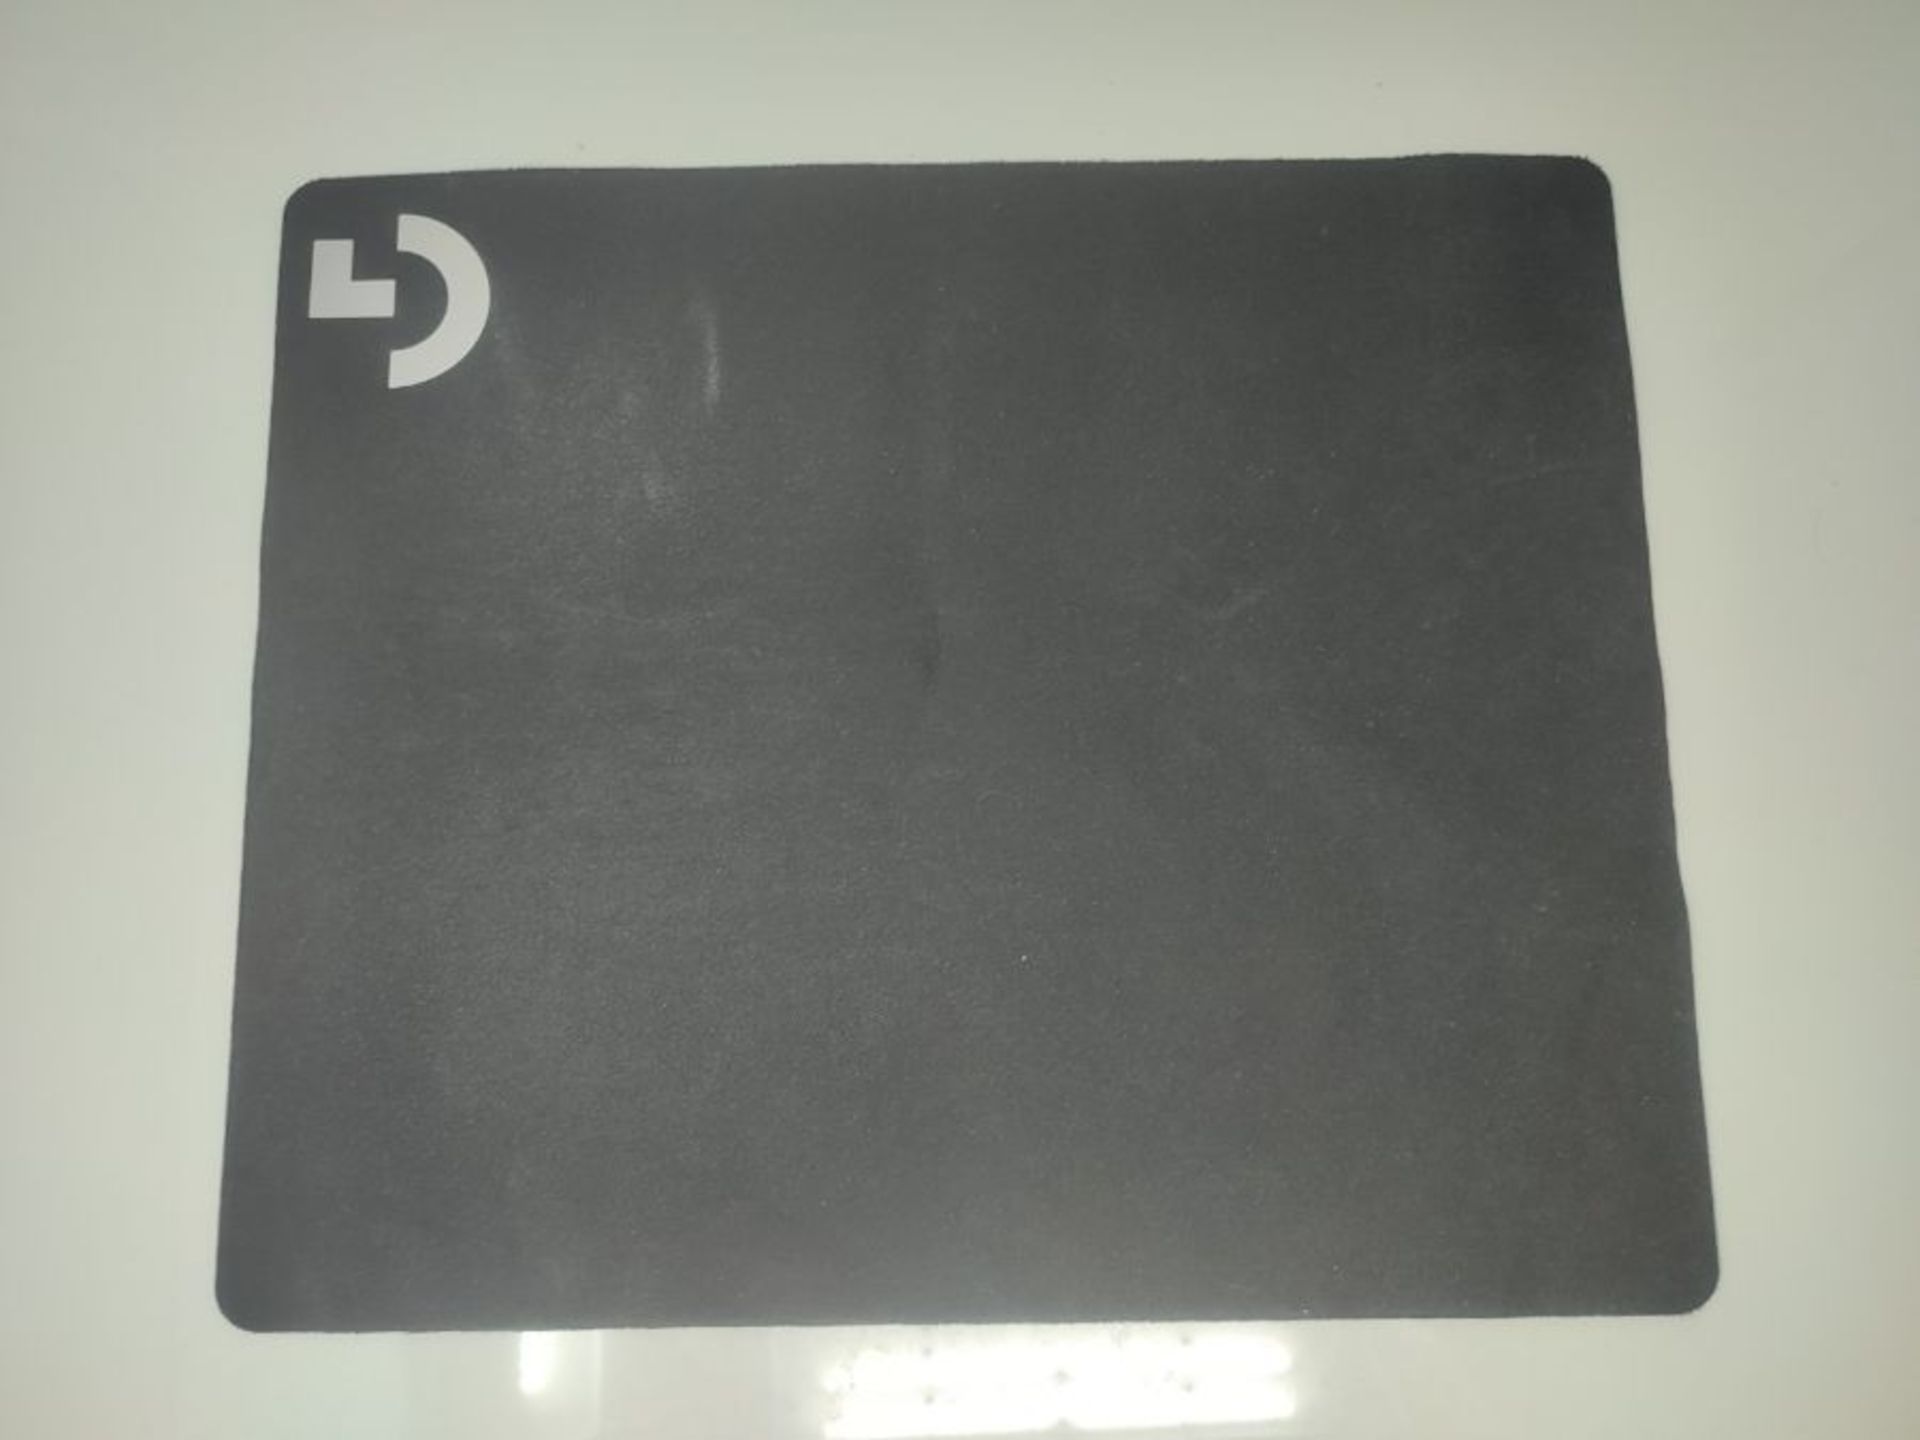 Logitech G240 Tappetino Mouse Gaming in Tessuto, Mouse Pad 340 x 280 mm, Spessore 1 mm - Image 3 of 3